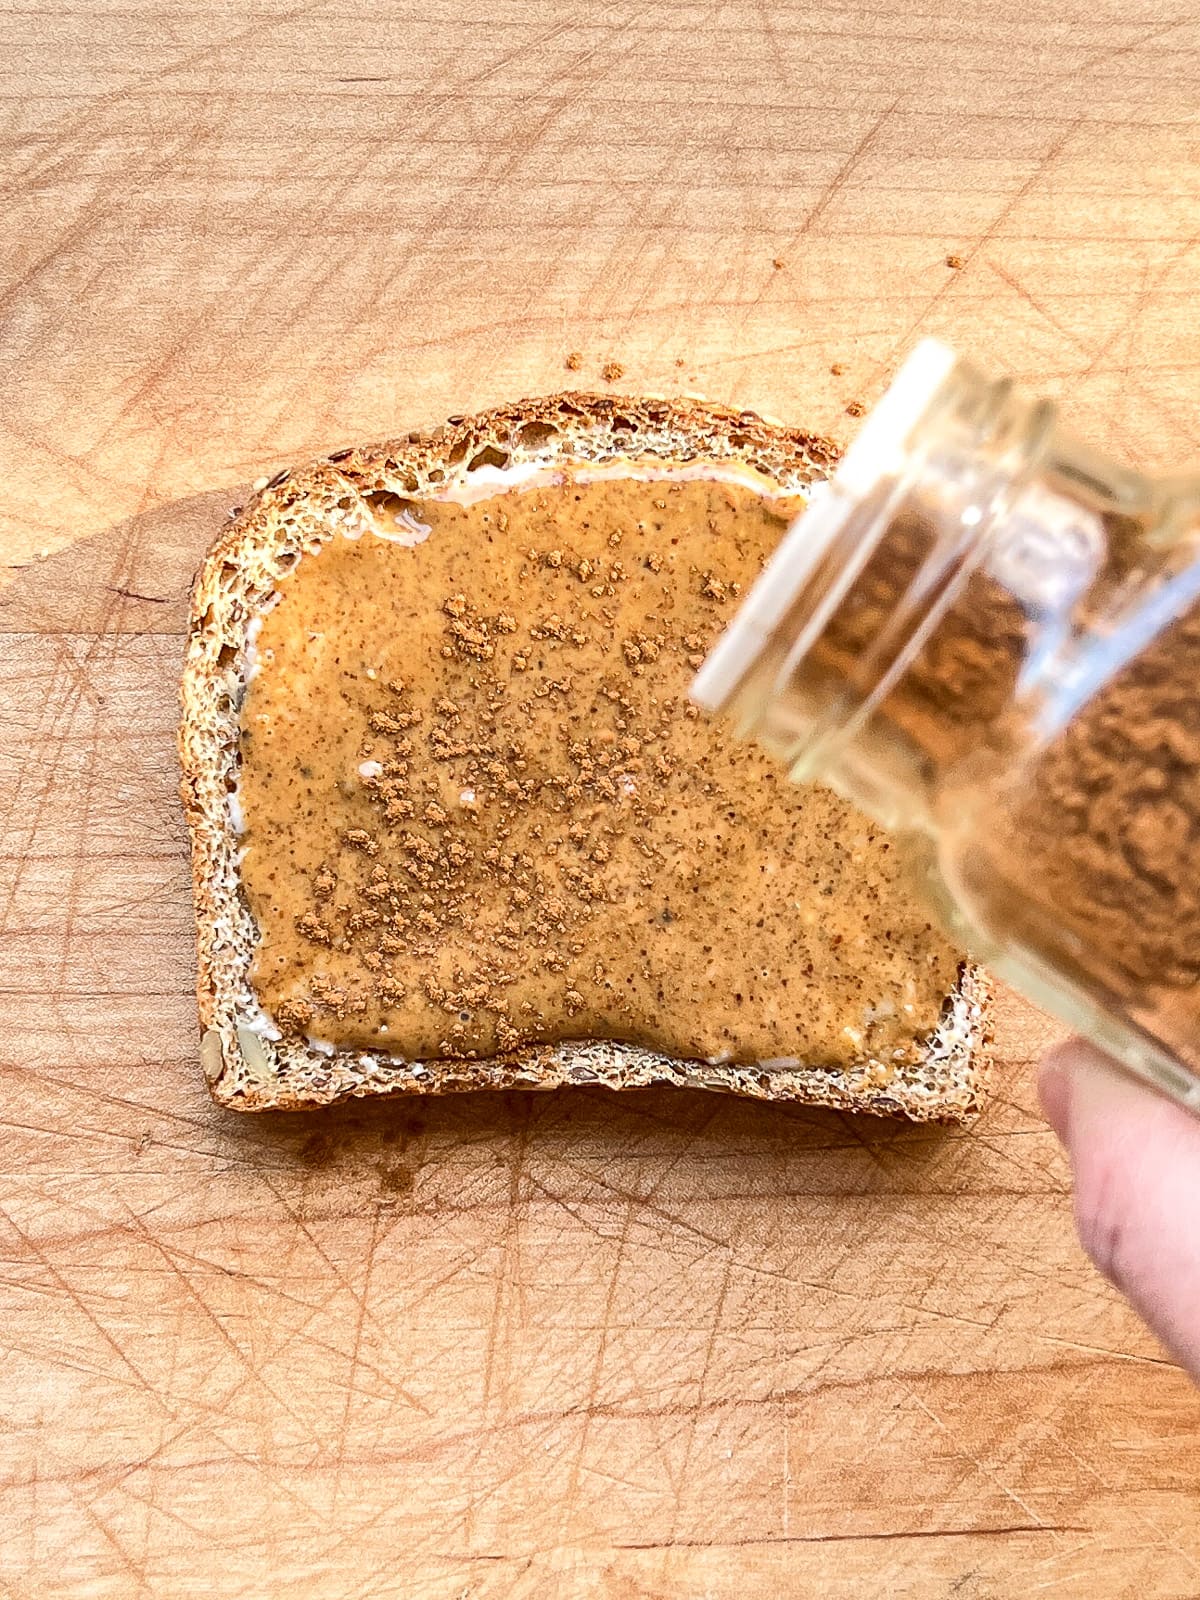 An image of cinnamon being sprinkled on toast.